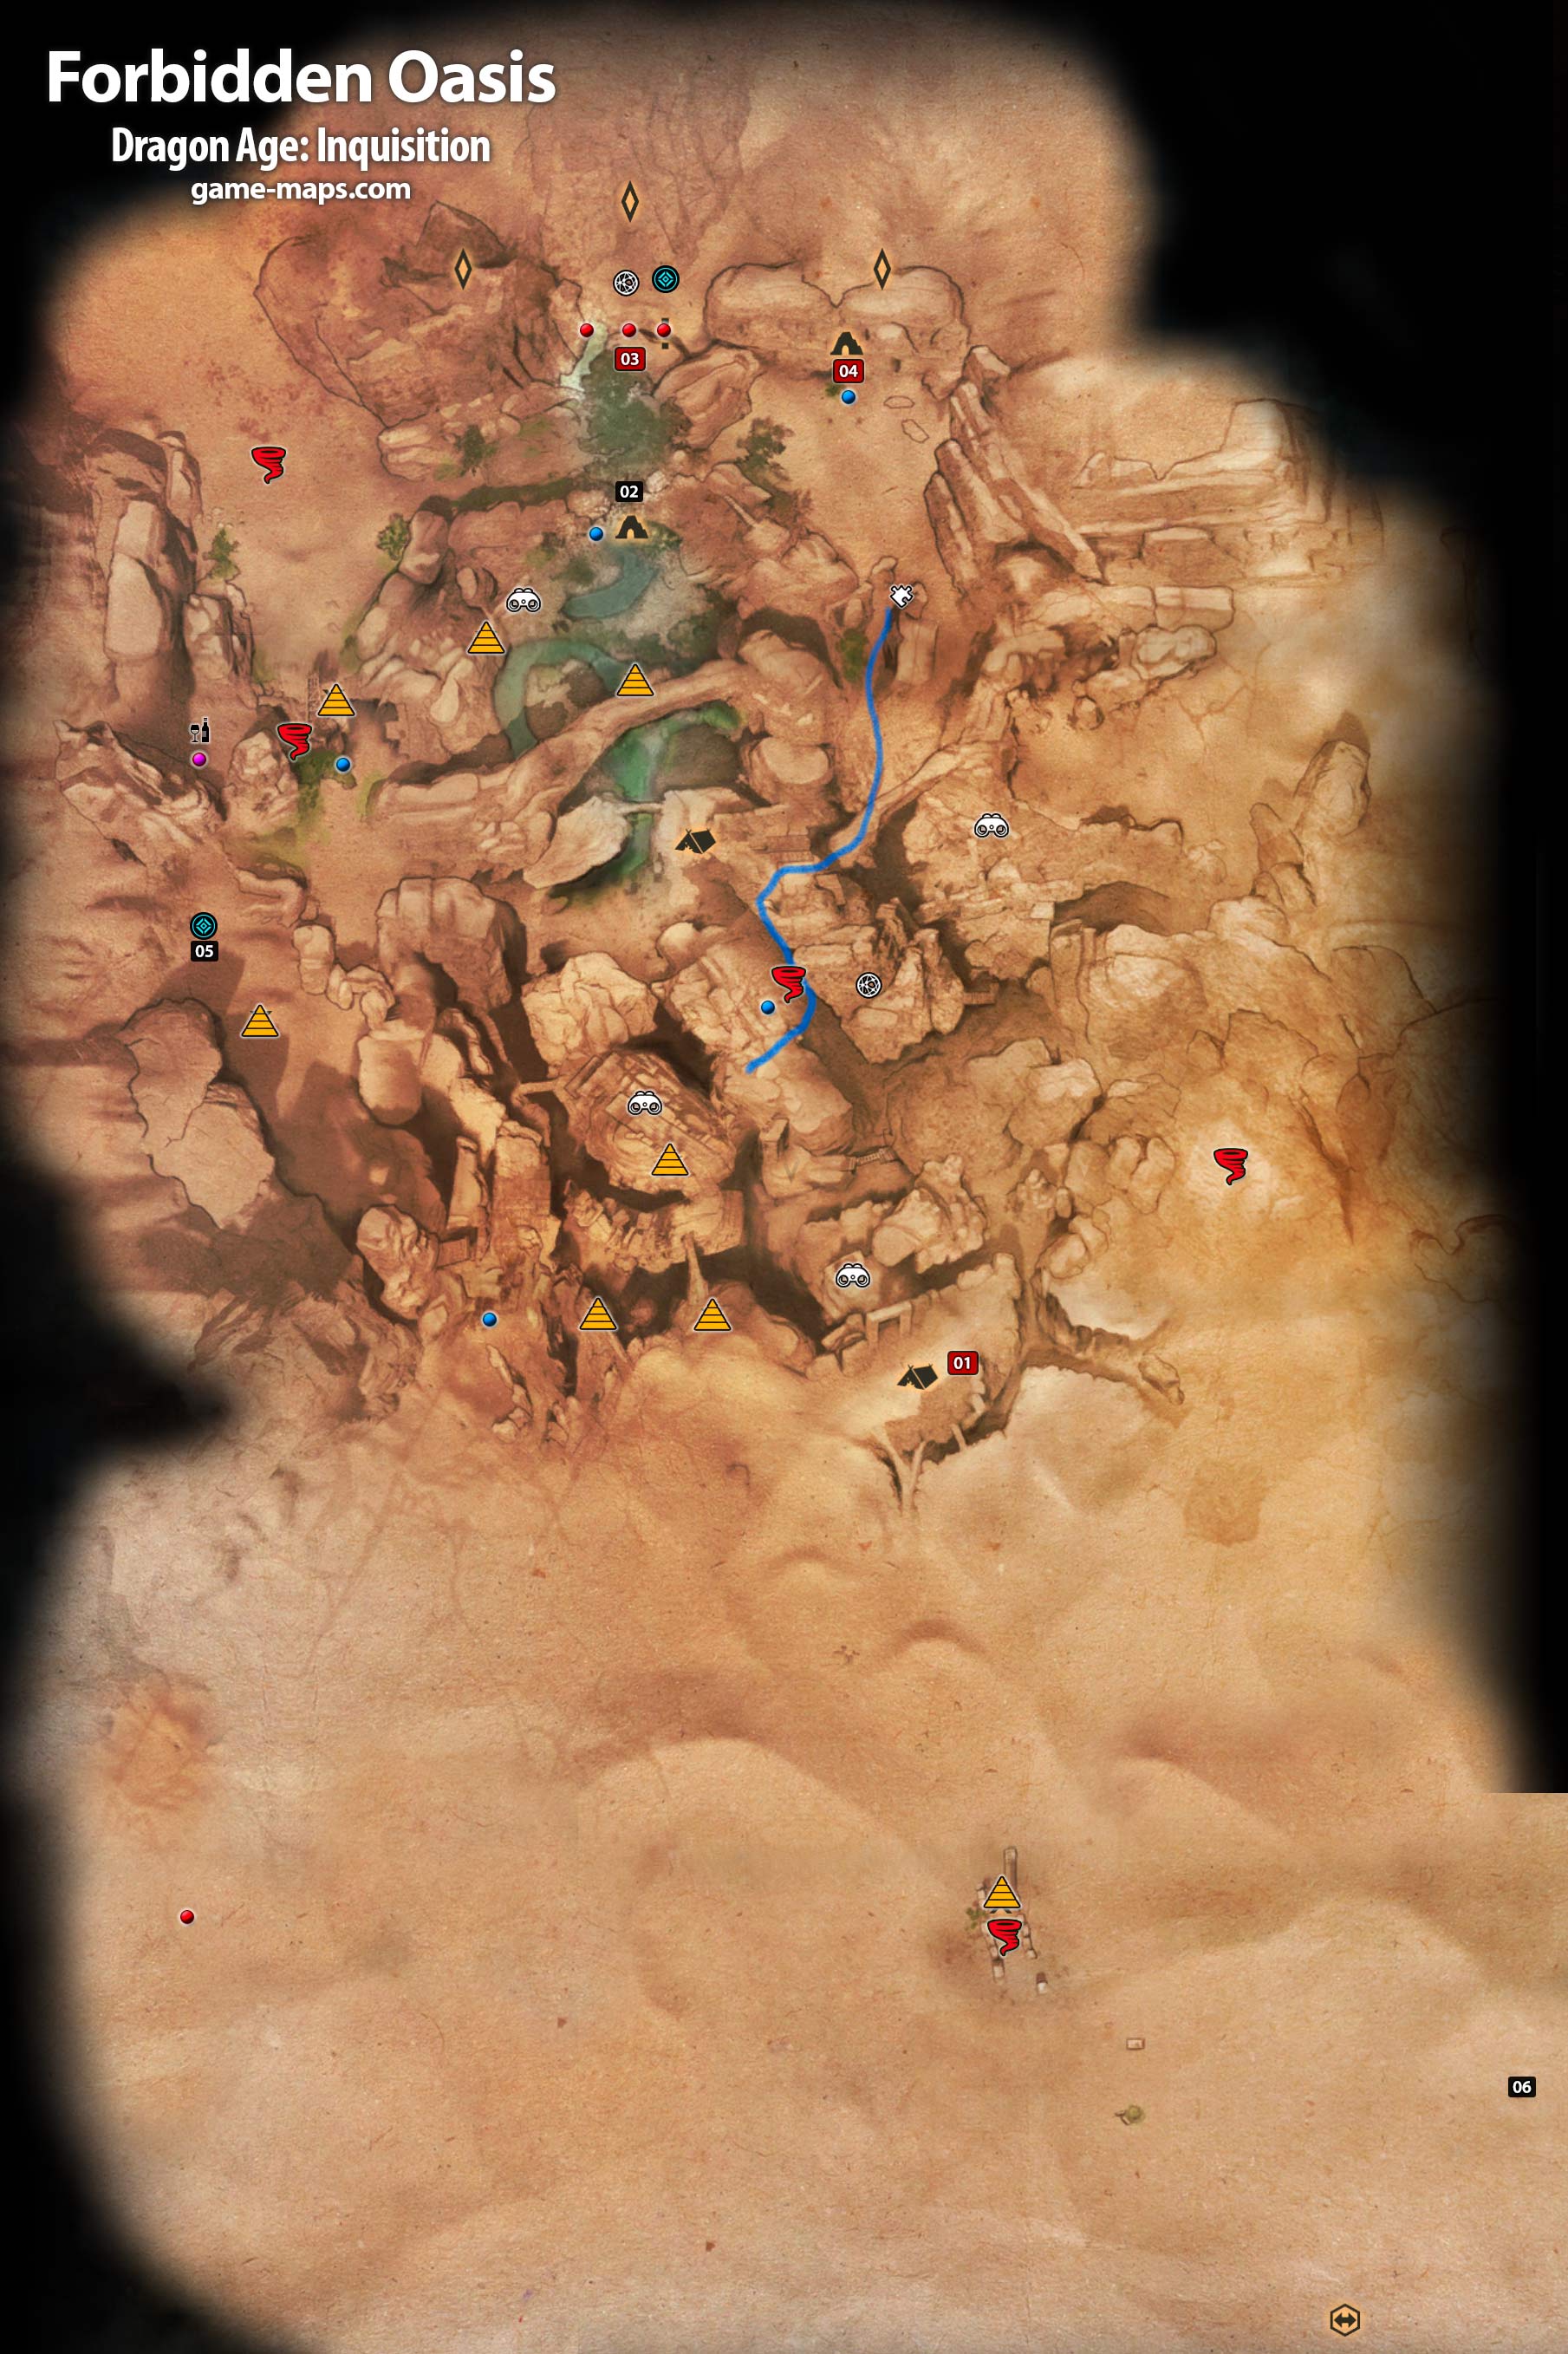 Forbidden Oasis Map Dragon Age: Inquisition